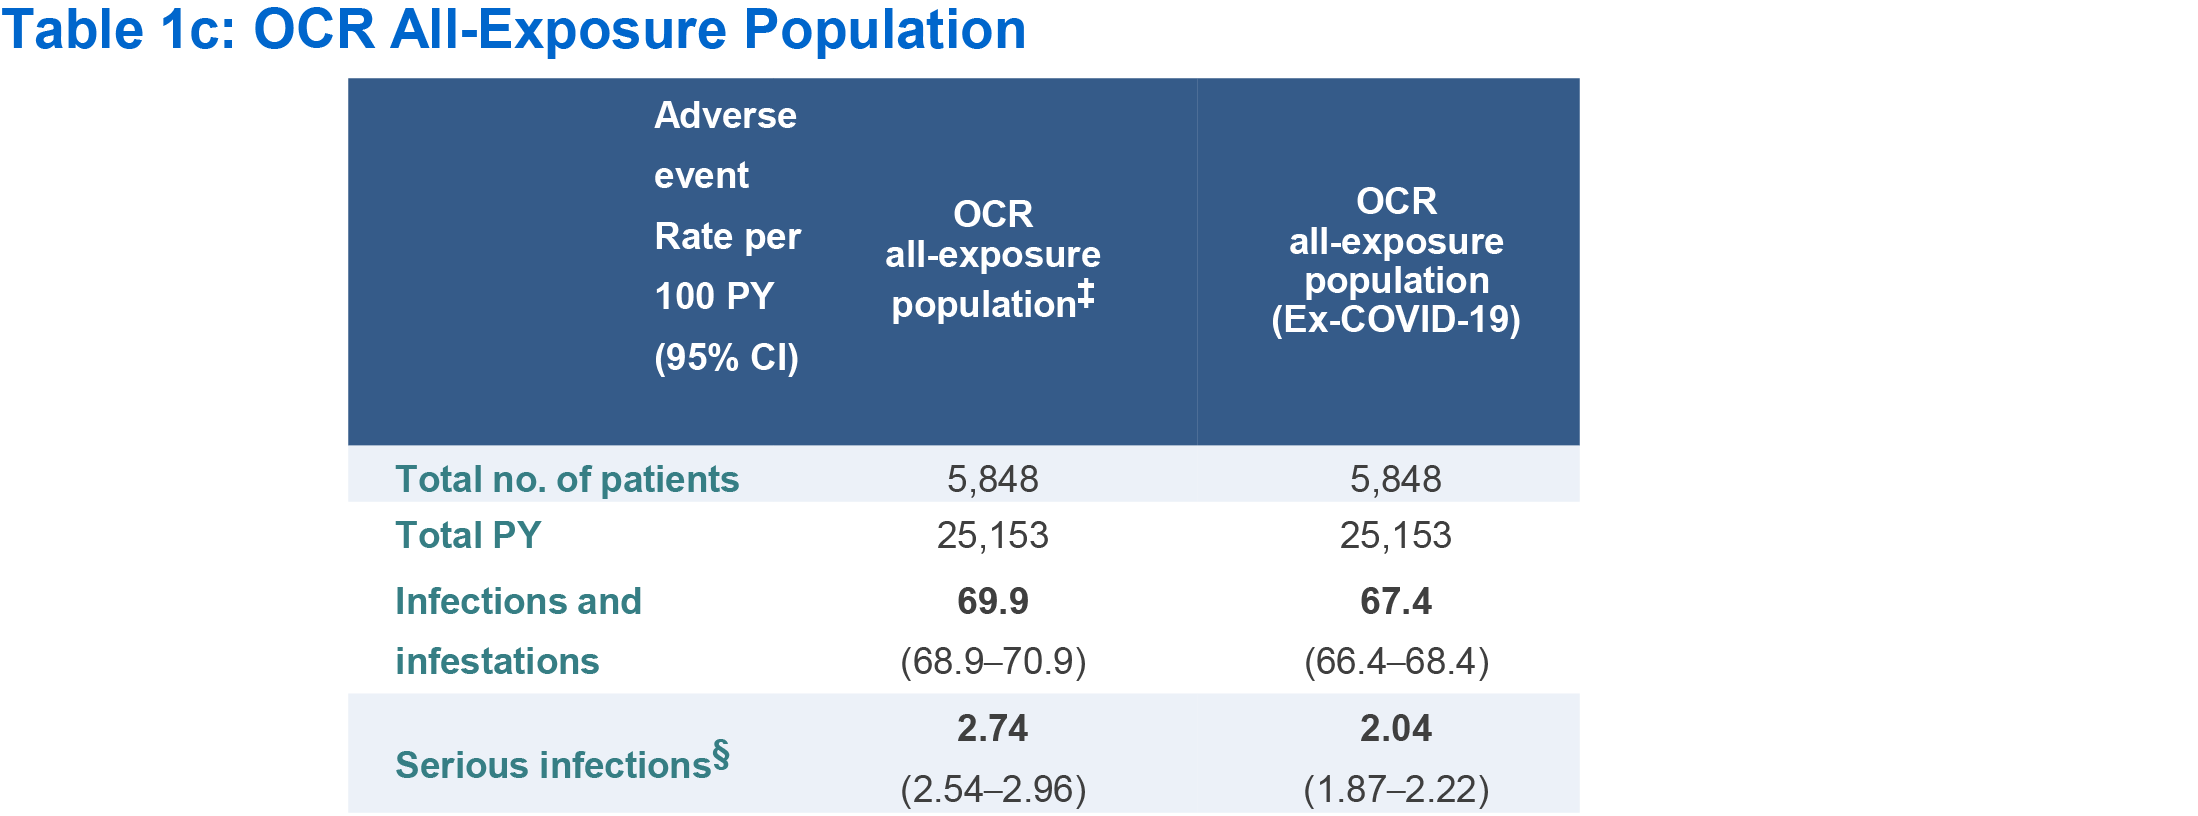 Table 1c: OCR All-Exposure Population